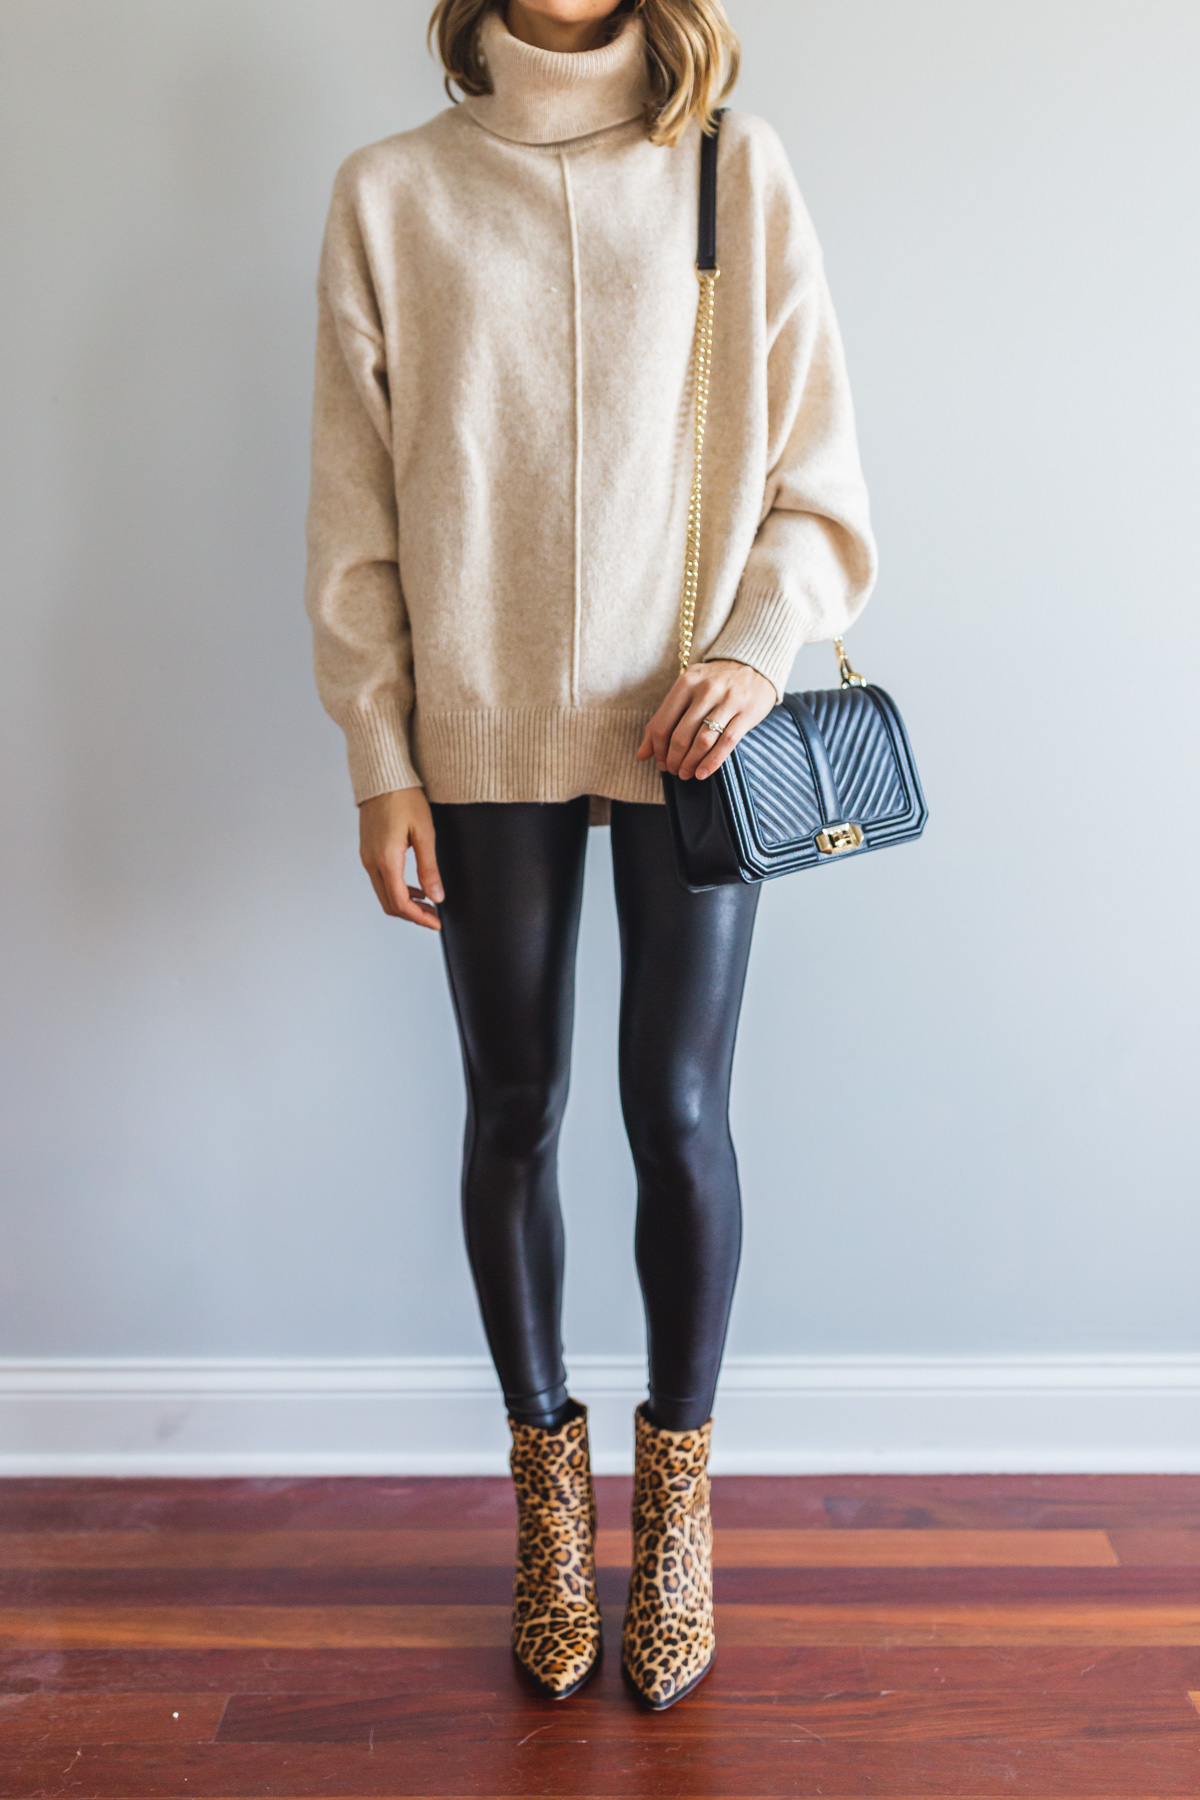 10 Easy ways to style your Spanx Faux leather leggings - The Fashionable  Maven